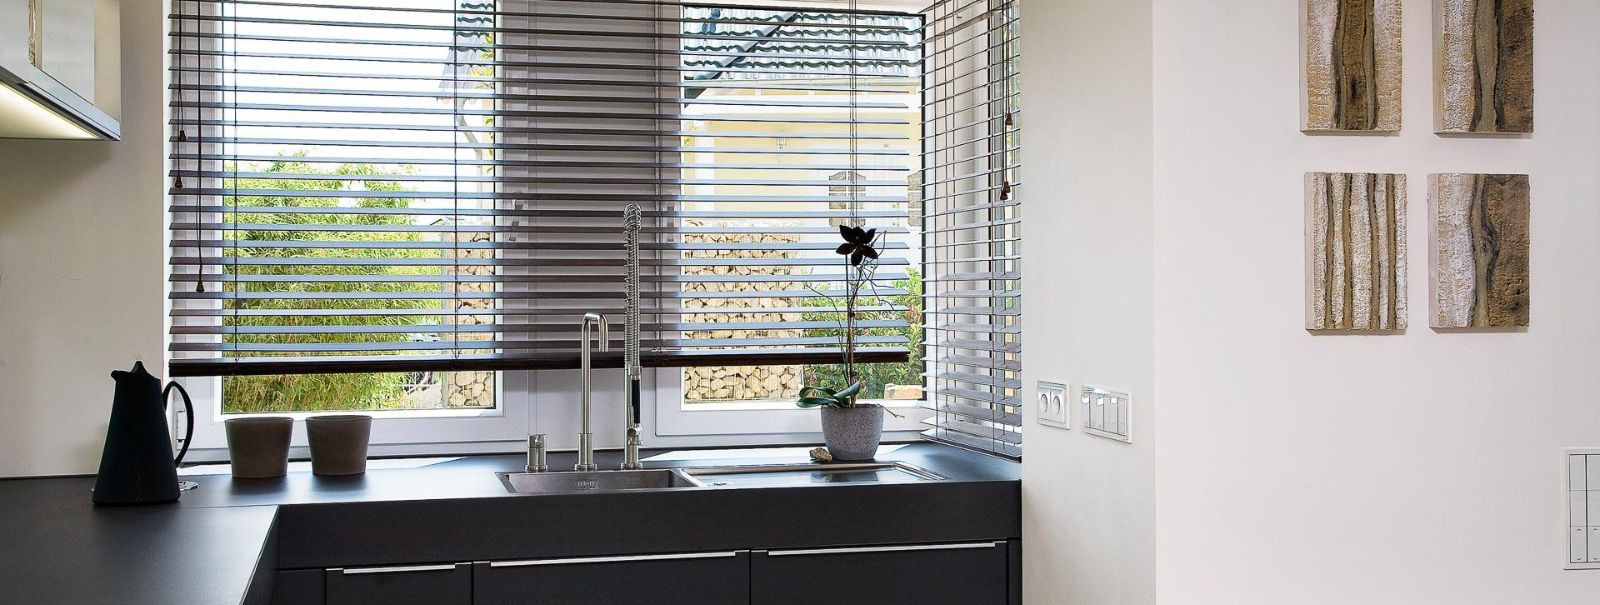 Strip curtains, also known as strip doors or PVC strip doors, are an innovative window treatment solution that consists of vertical strips made from clear or ti